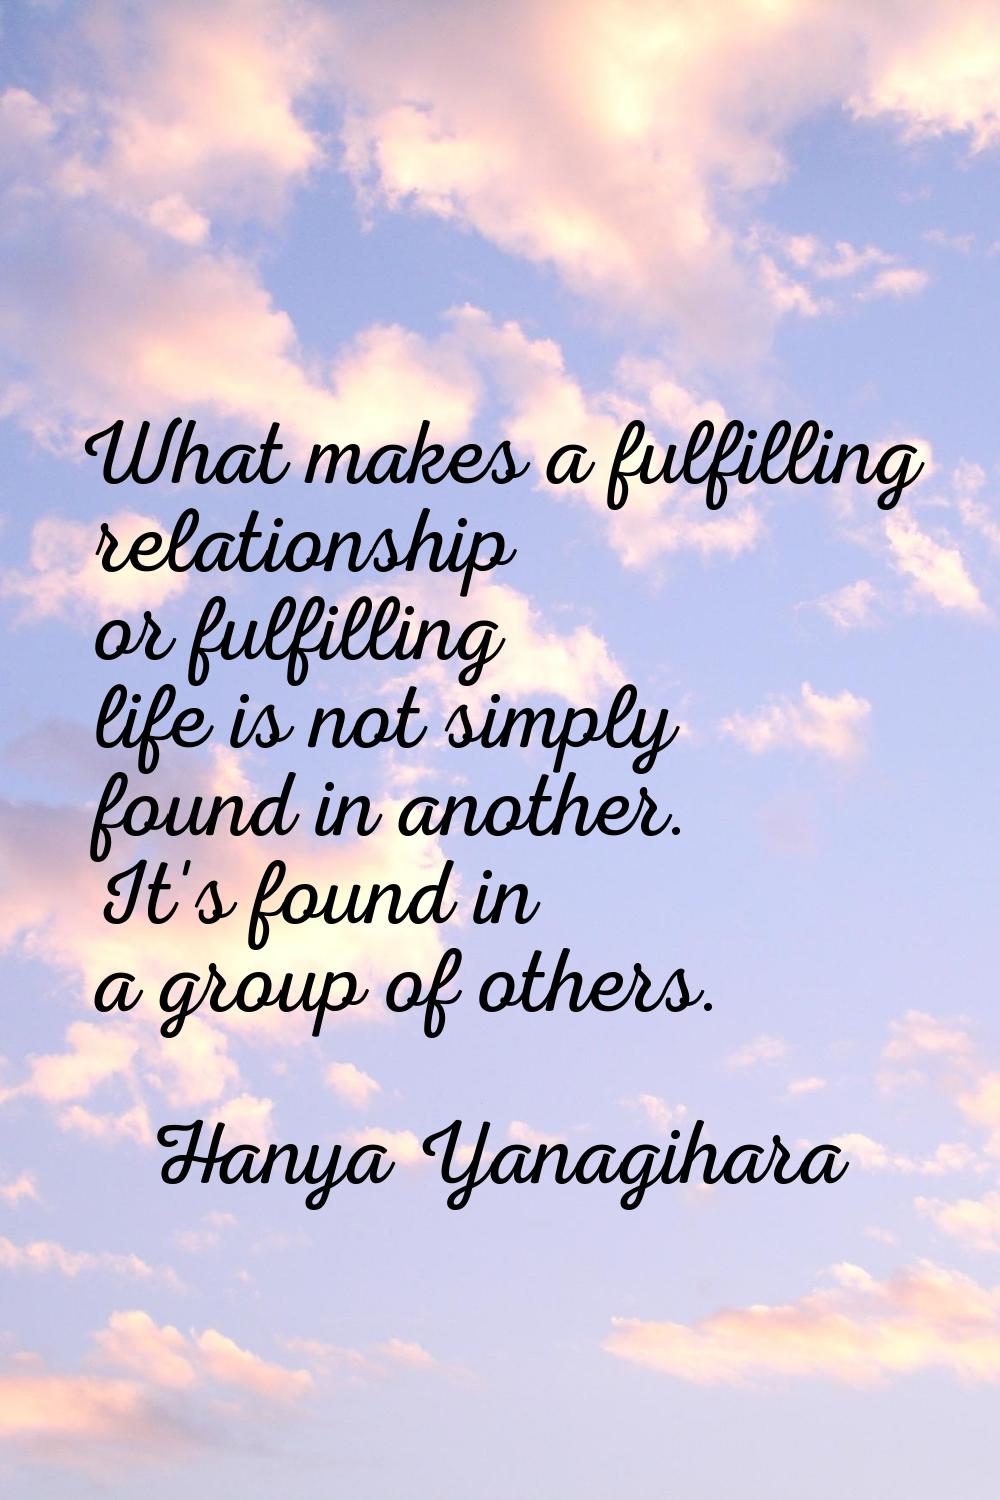 What makes a fulfilling relationship or fulfilling life is not simply found in another. It's found 